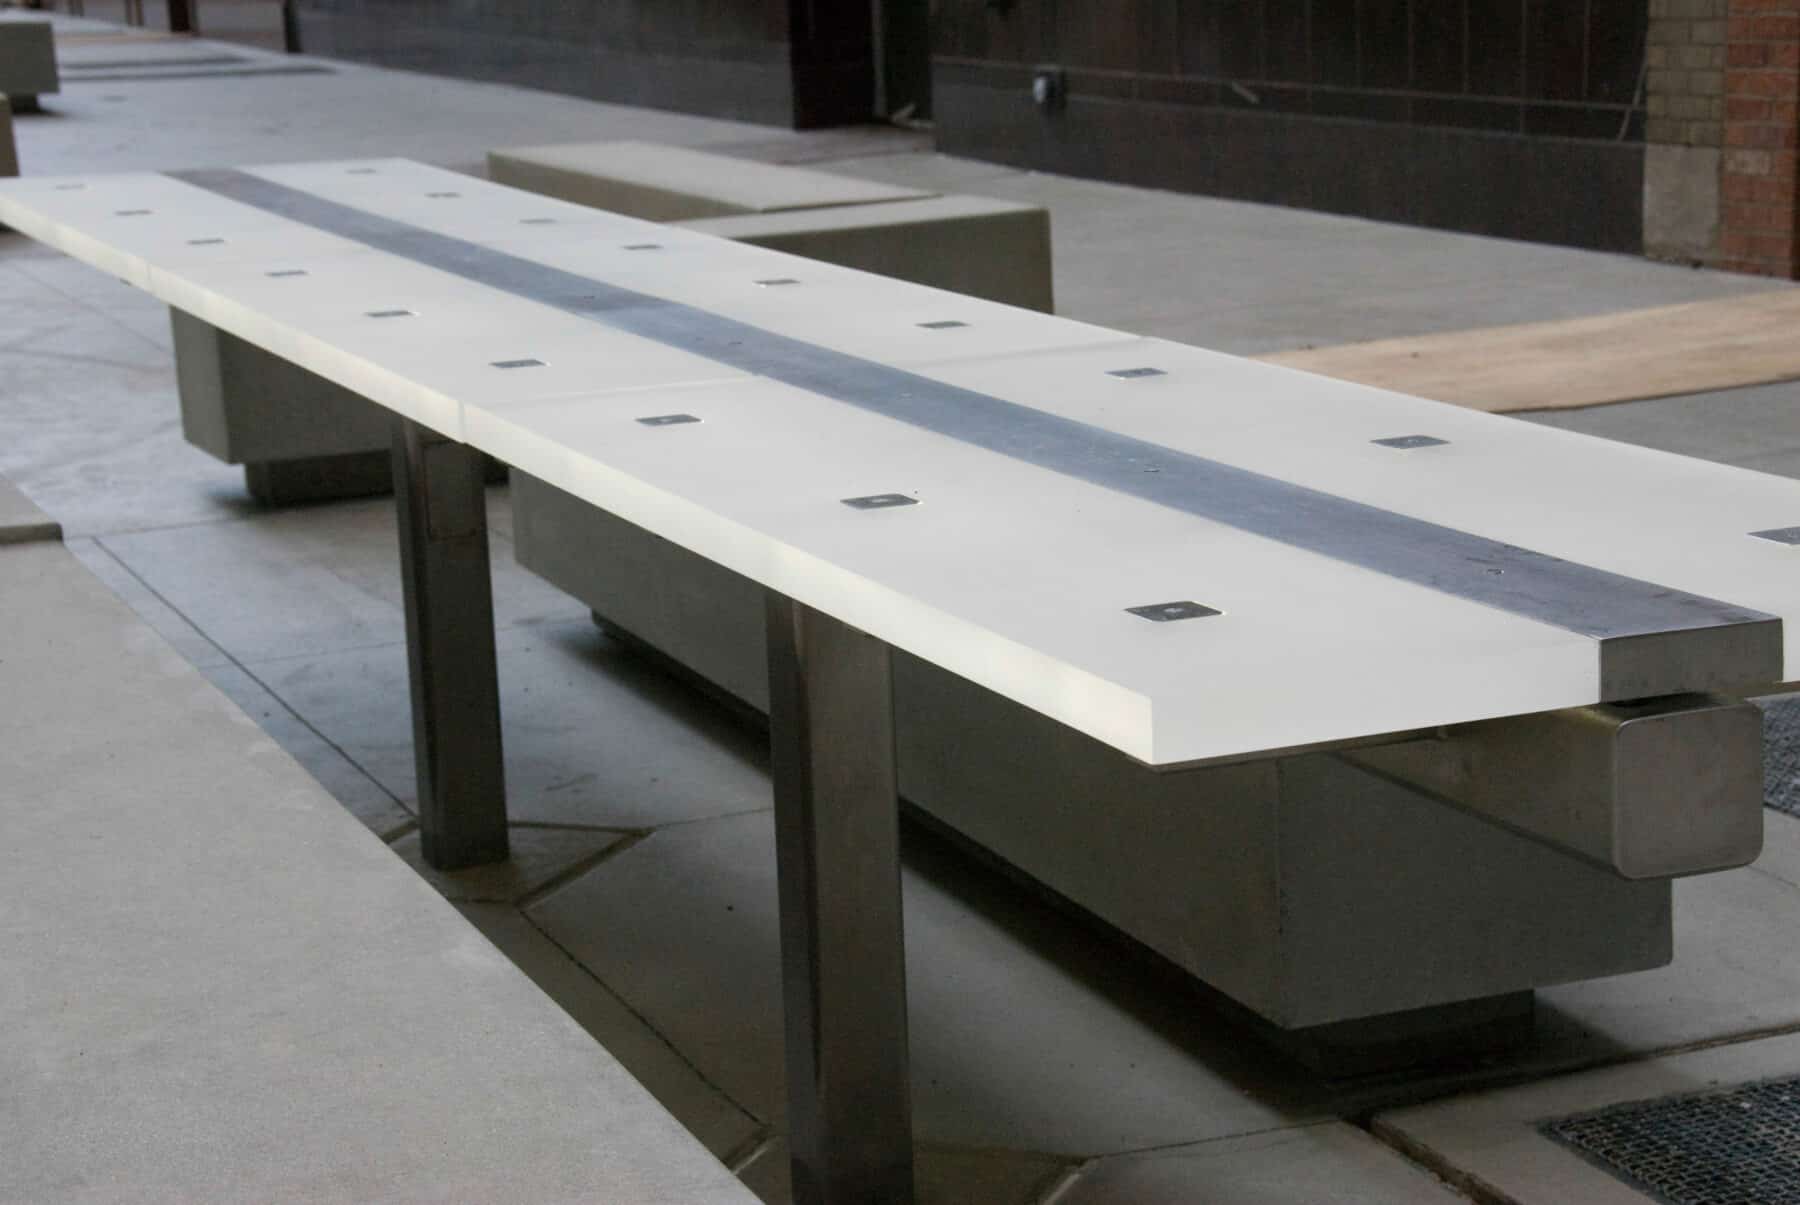 Custom Fabrication of Architectural Acrylic Edge Lit Table with Metal Details from Construction Specialty Projects by Commercial Builder & General Contractor Structural Enterprises